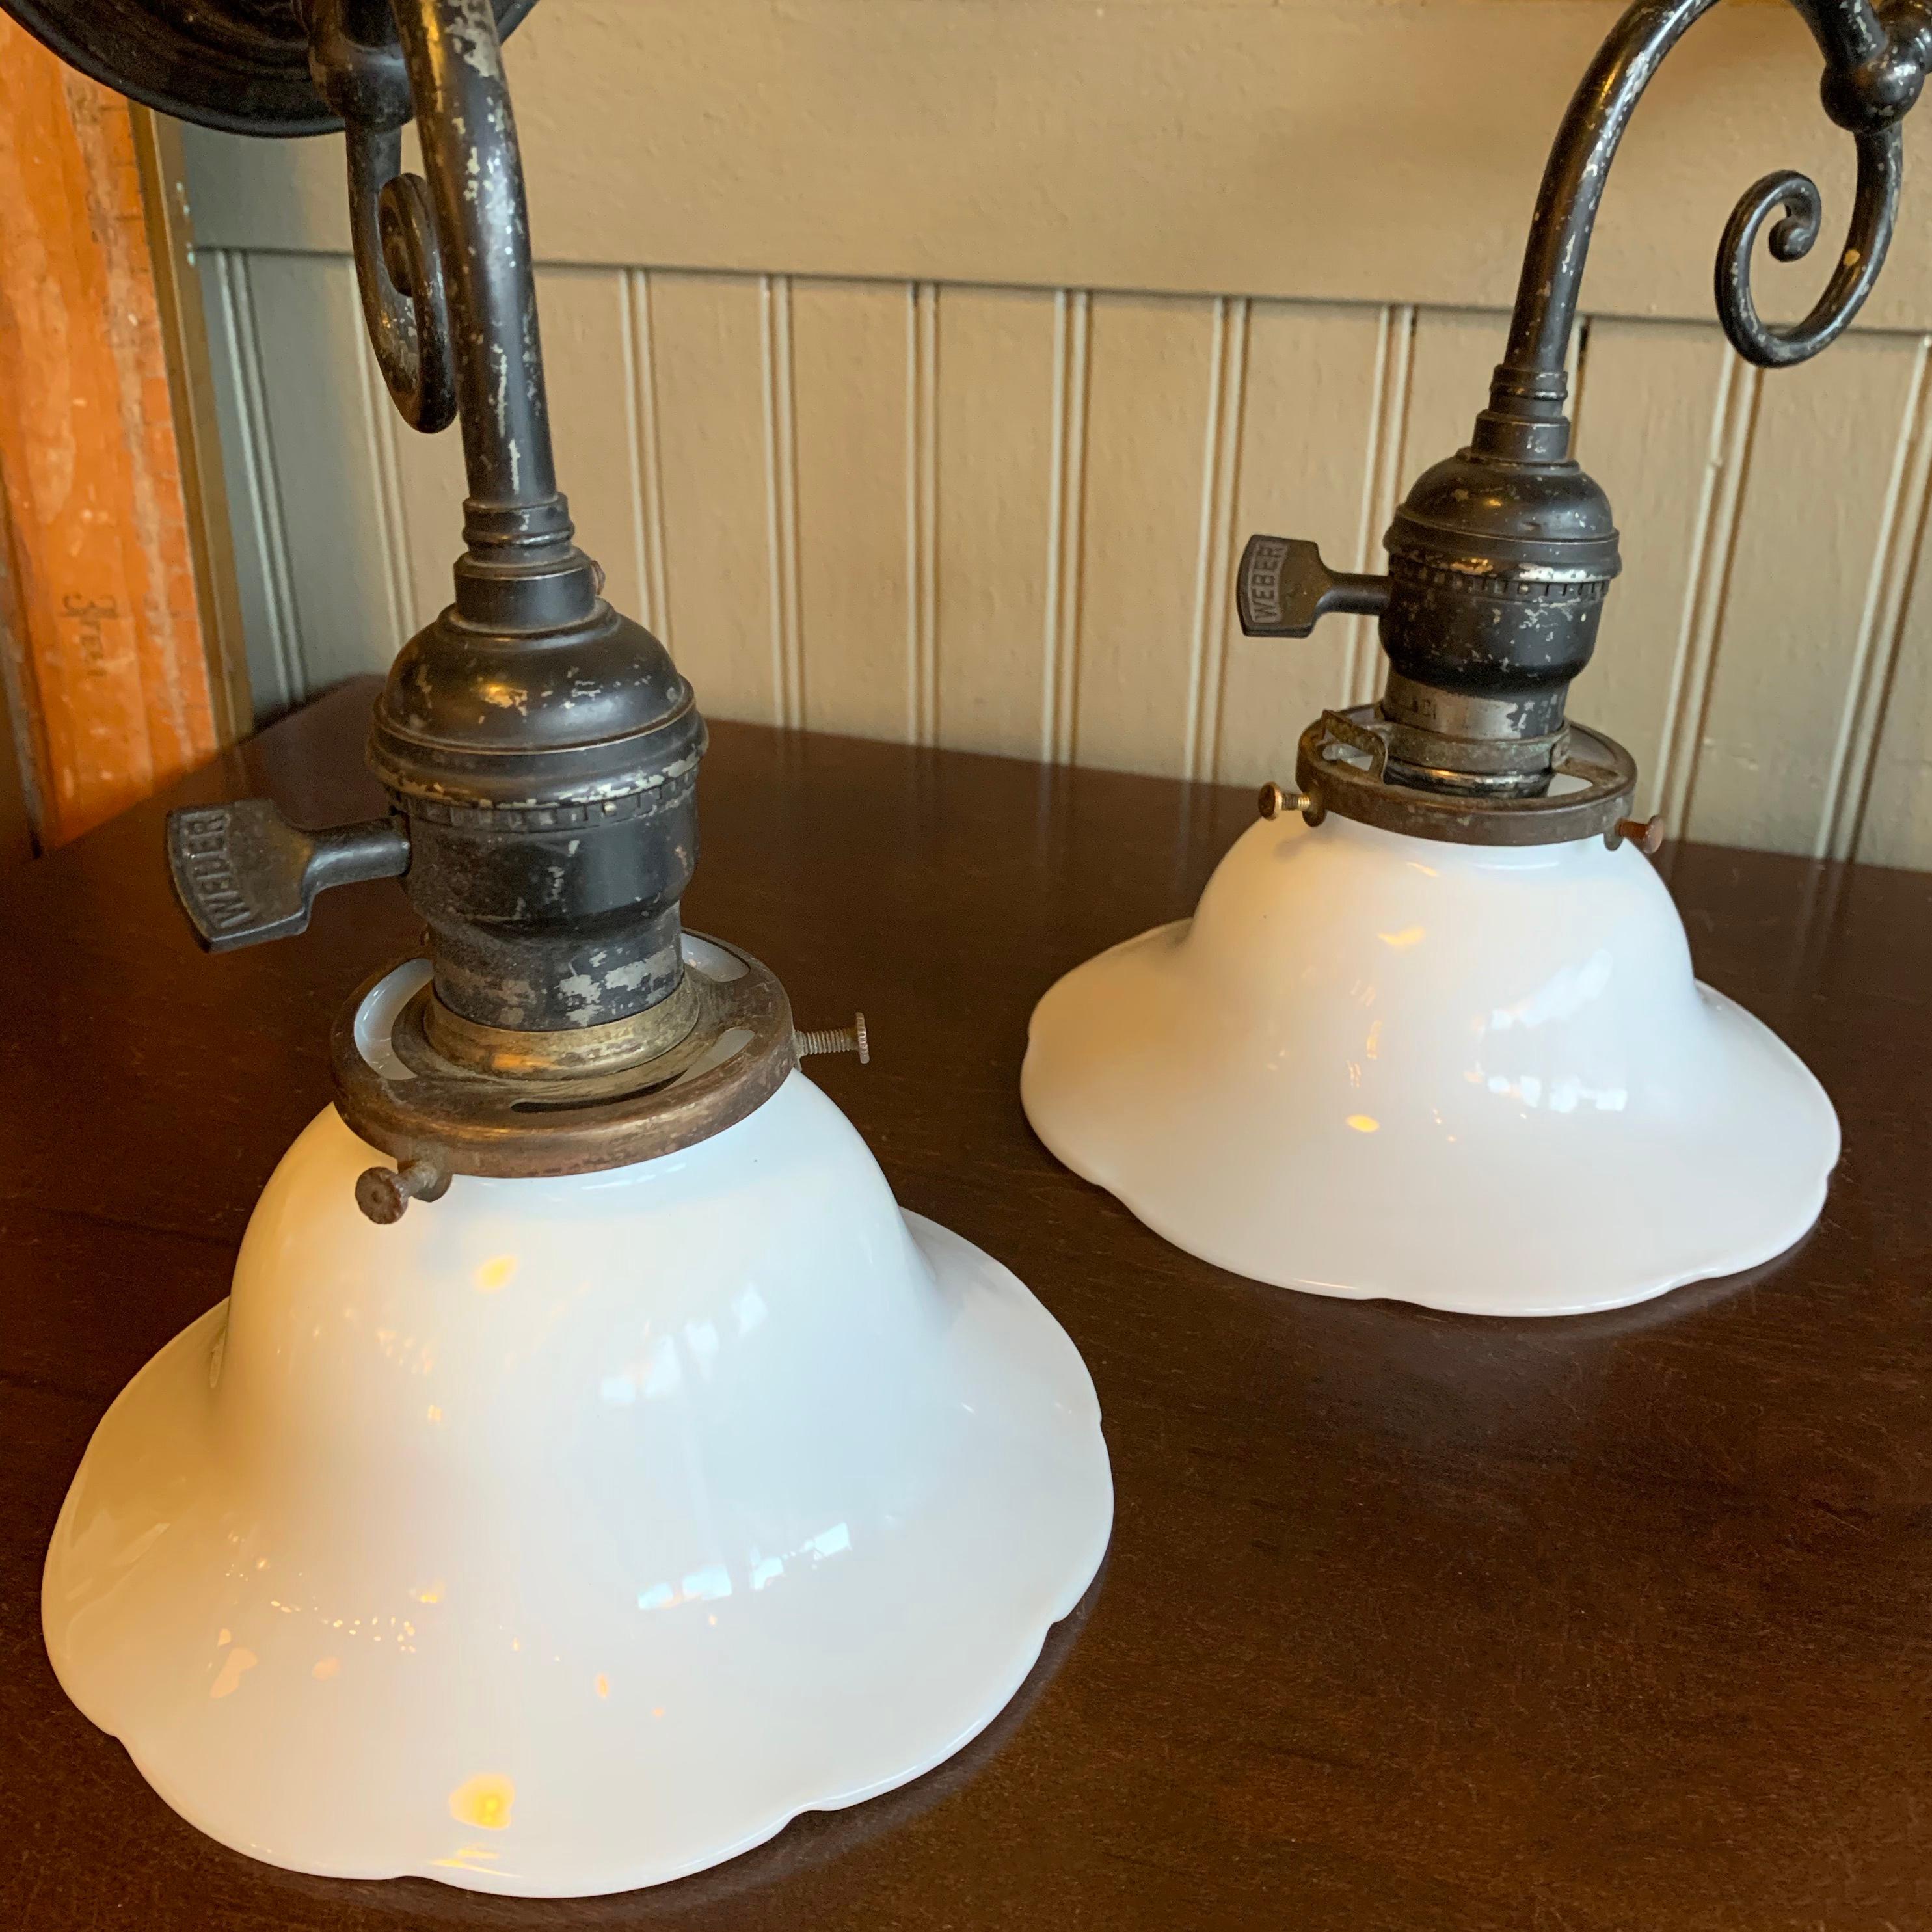 20th Century Industrial Blackened Nickel and Milk Glass Wall Sconce Lamps